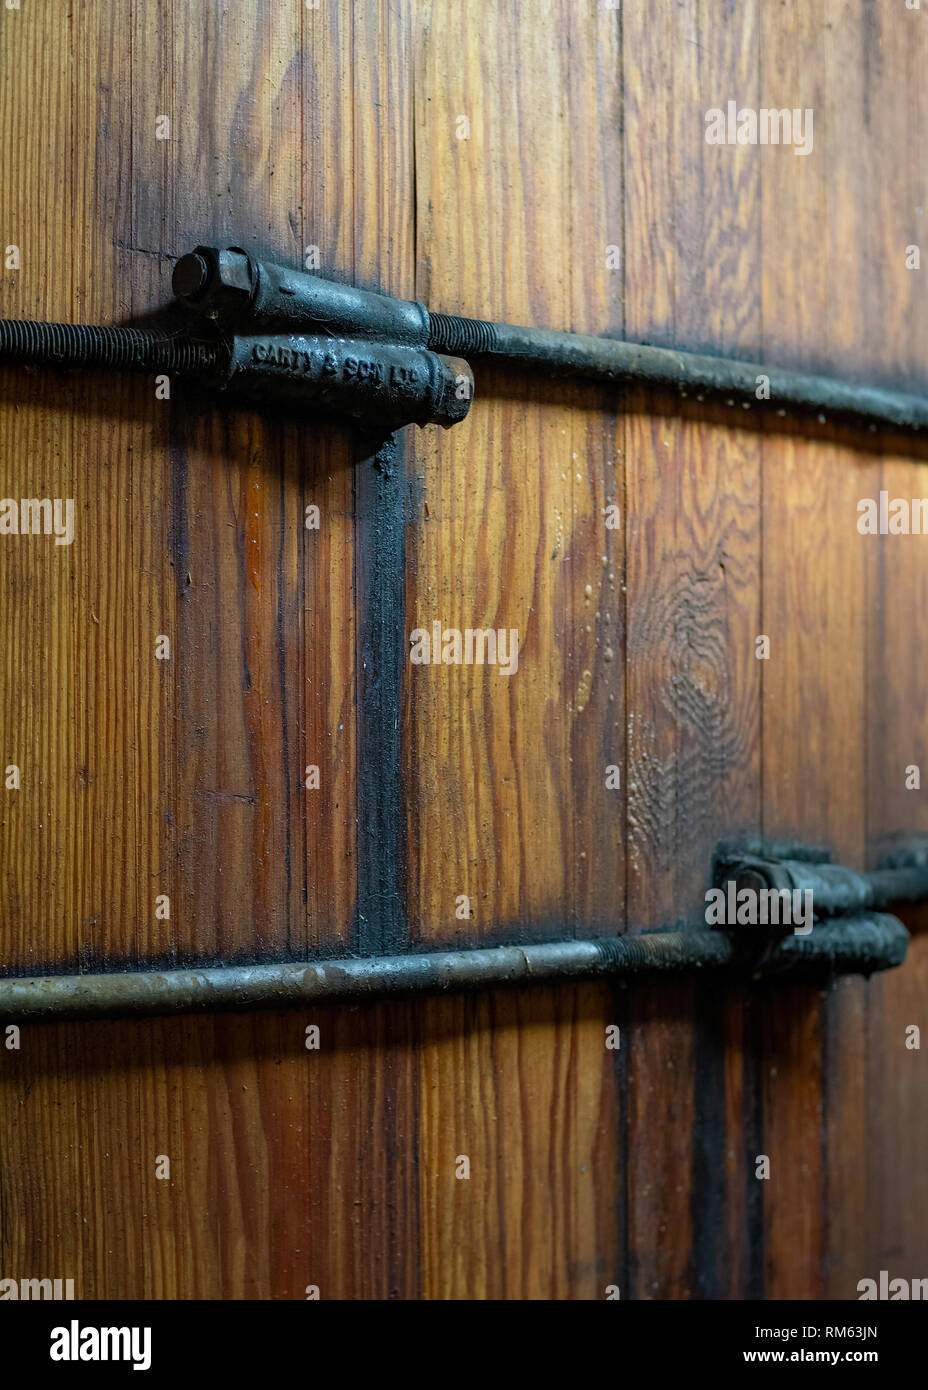 Close up of the side of an old, wooden mash tun whisky fermentation tank at Balblair distillery Edderton, Ross-shire, Scotland Stock Photo